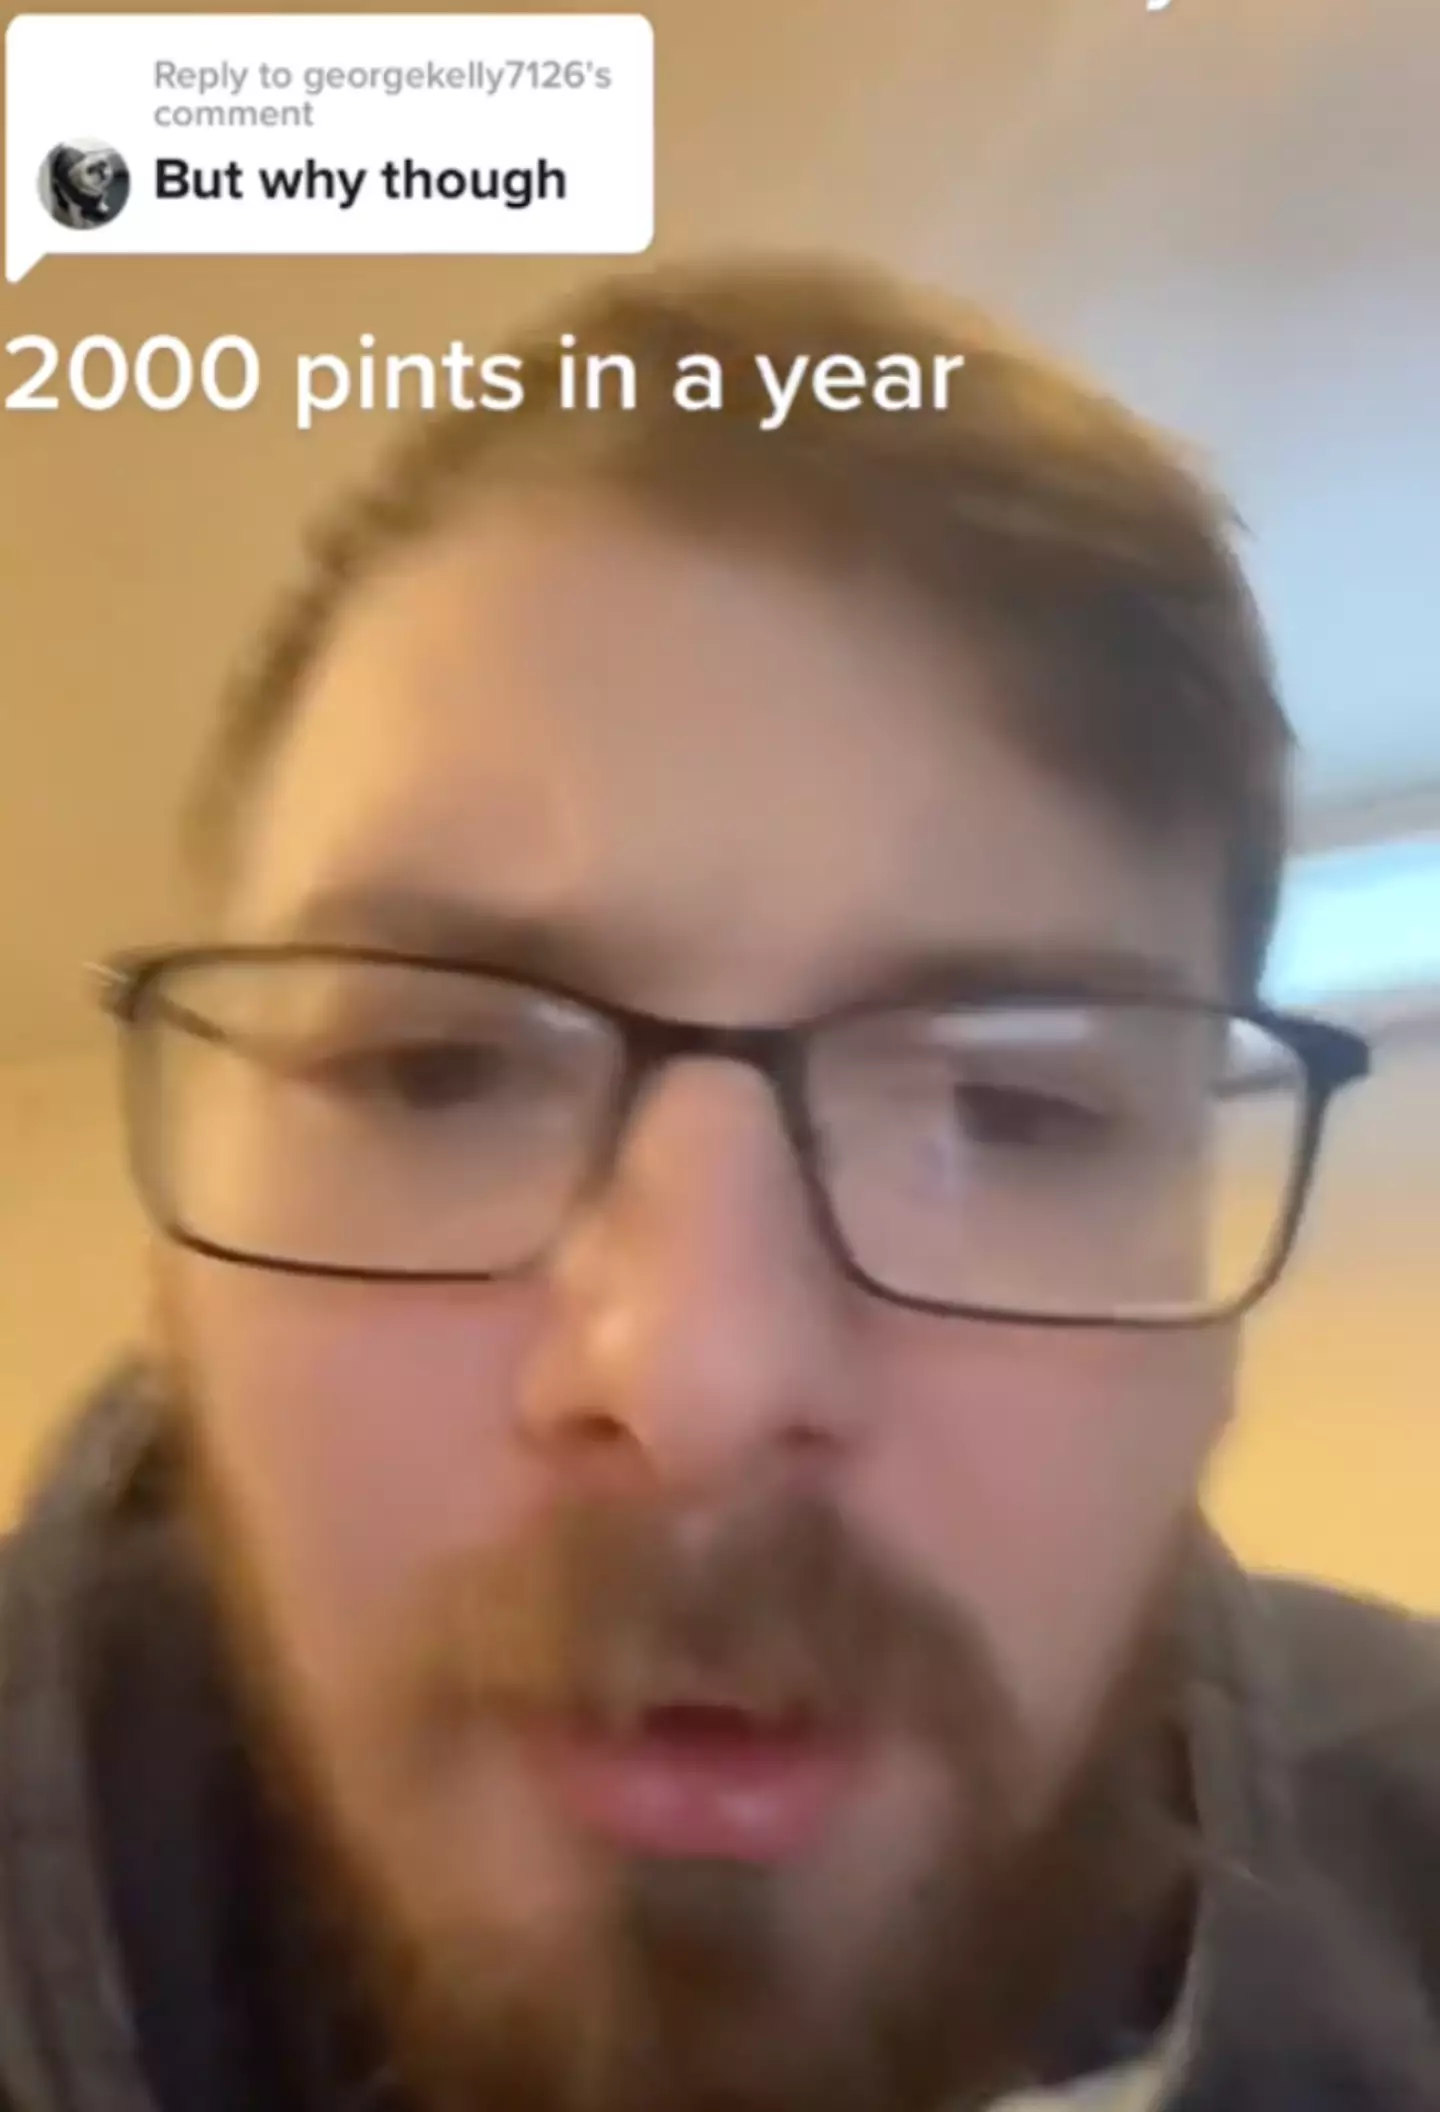 Jon May is aiming to drink 2,000 pints in 200 days.